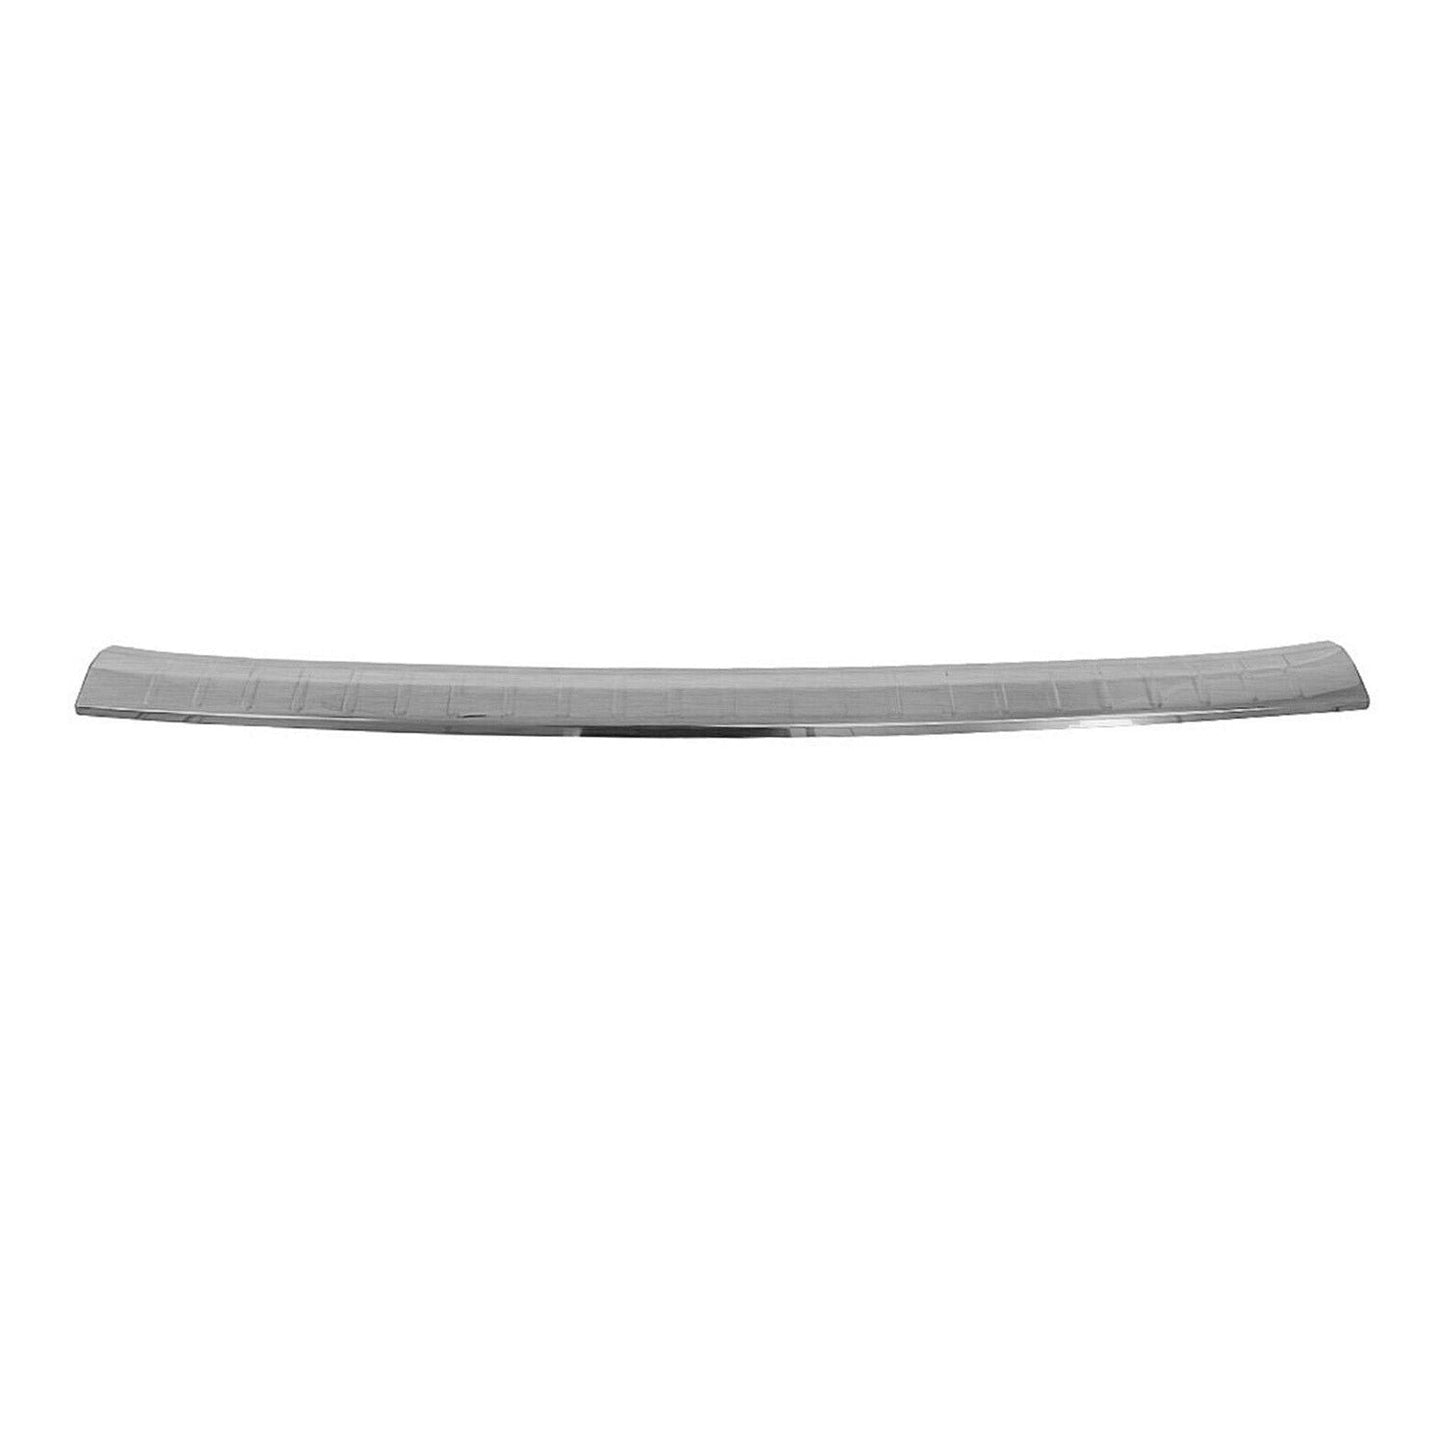 OMAC Rear Bumper Sill Cover Guard for Mitsubishi Eclipse Cross 2018-24 Brushed Steel 4917093NT